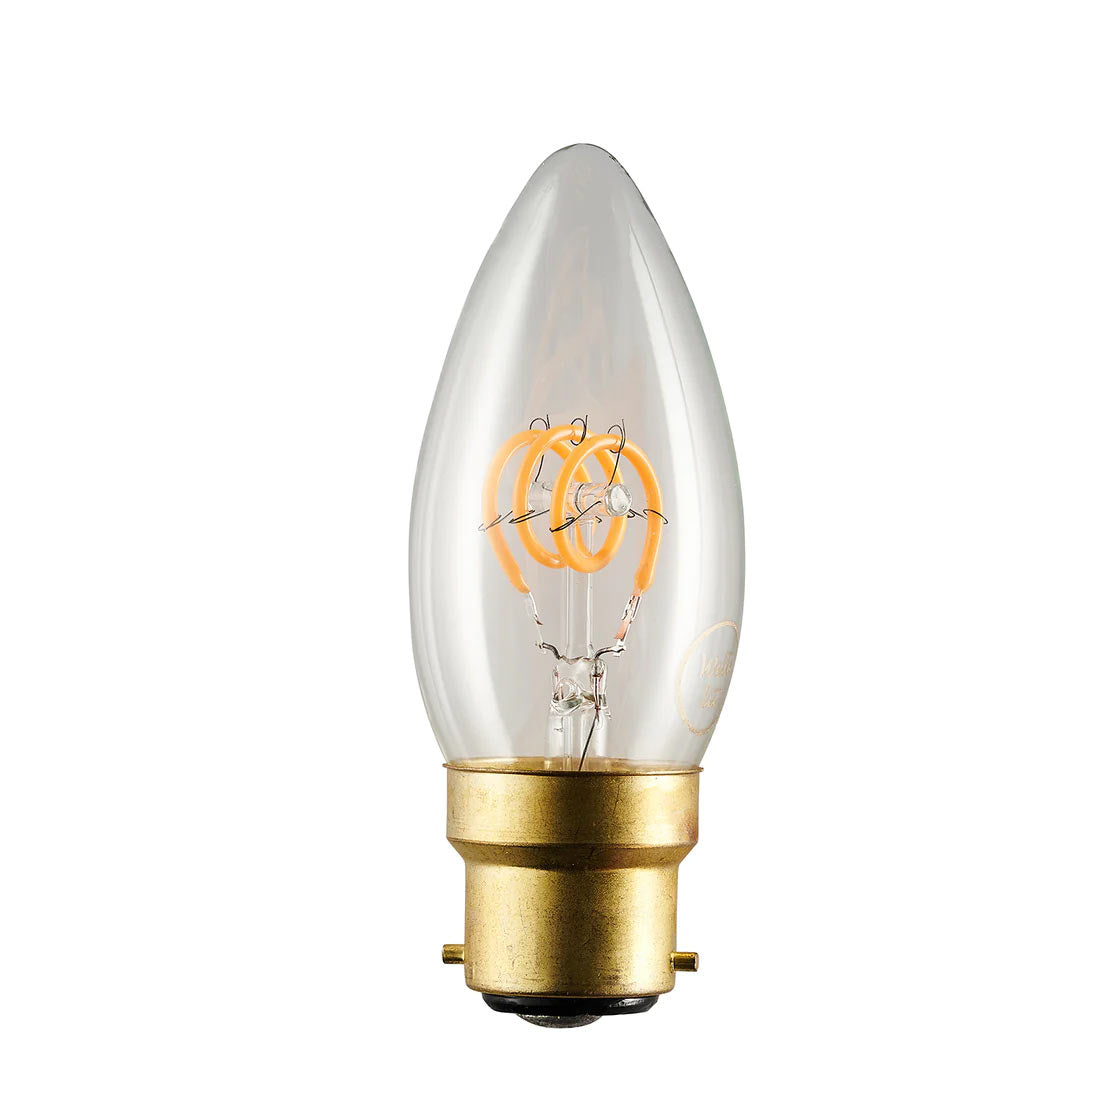 The Leda Decorative LED Candle Bulb has a B22 fitting and is a fancy bulb for lamps.